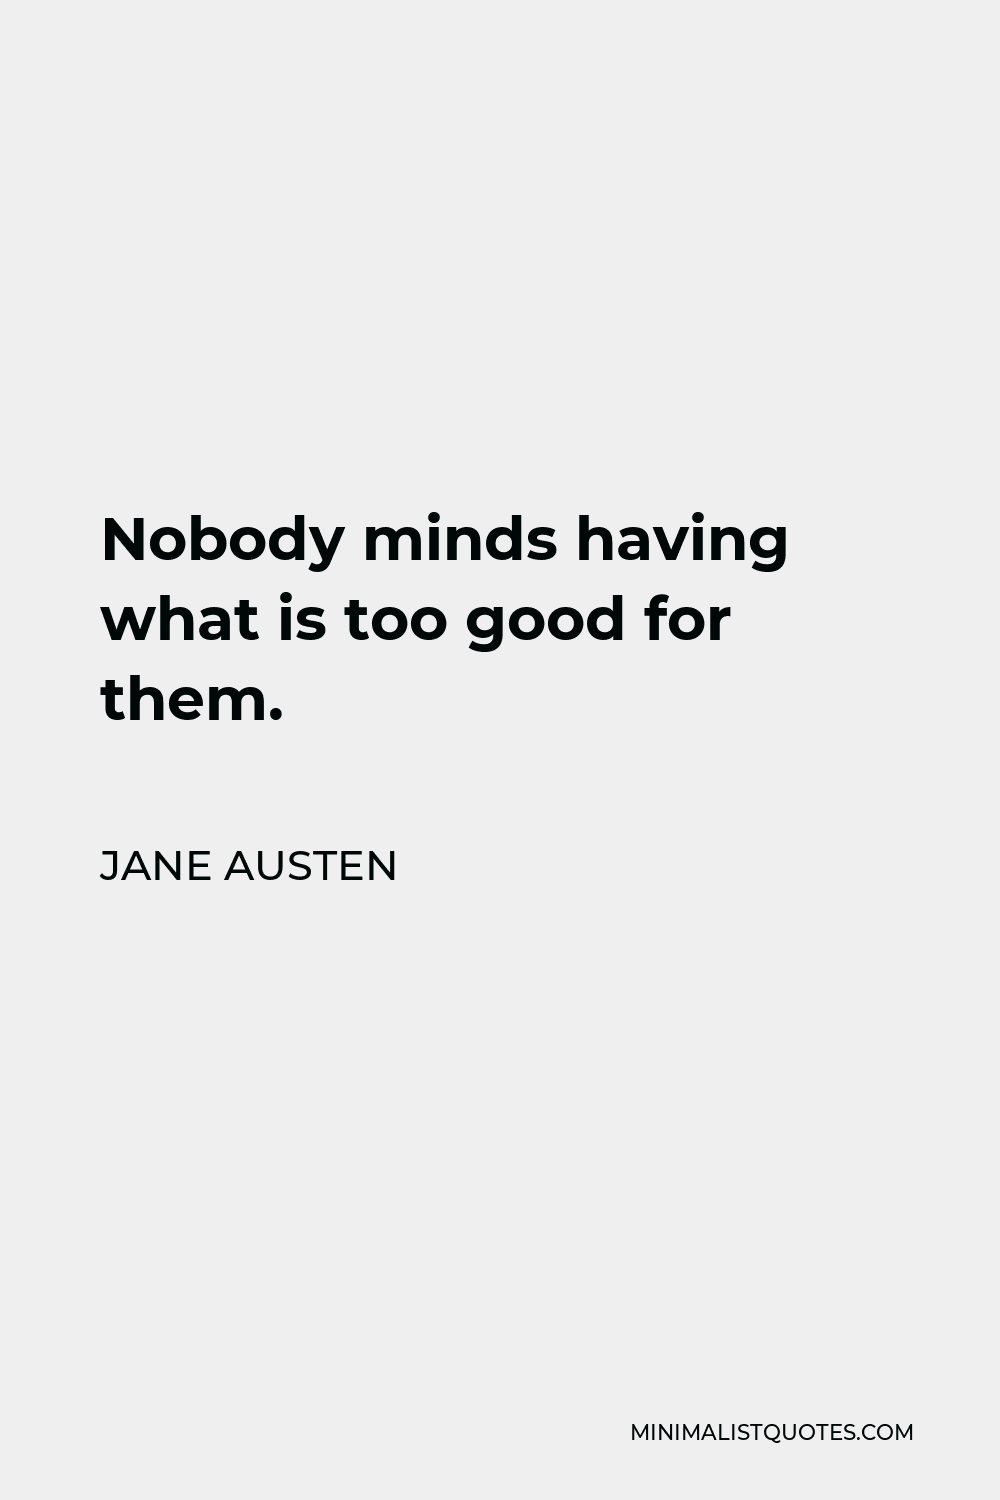 Jane Austen Quote - Nobody minds having what is too good for them.